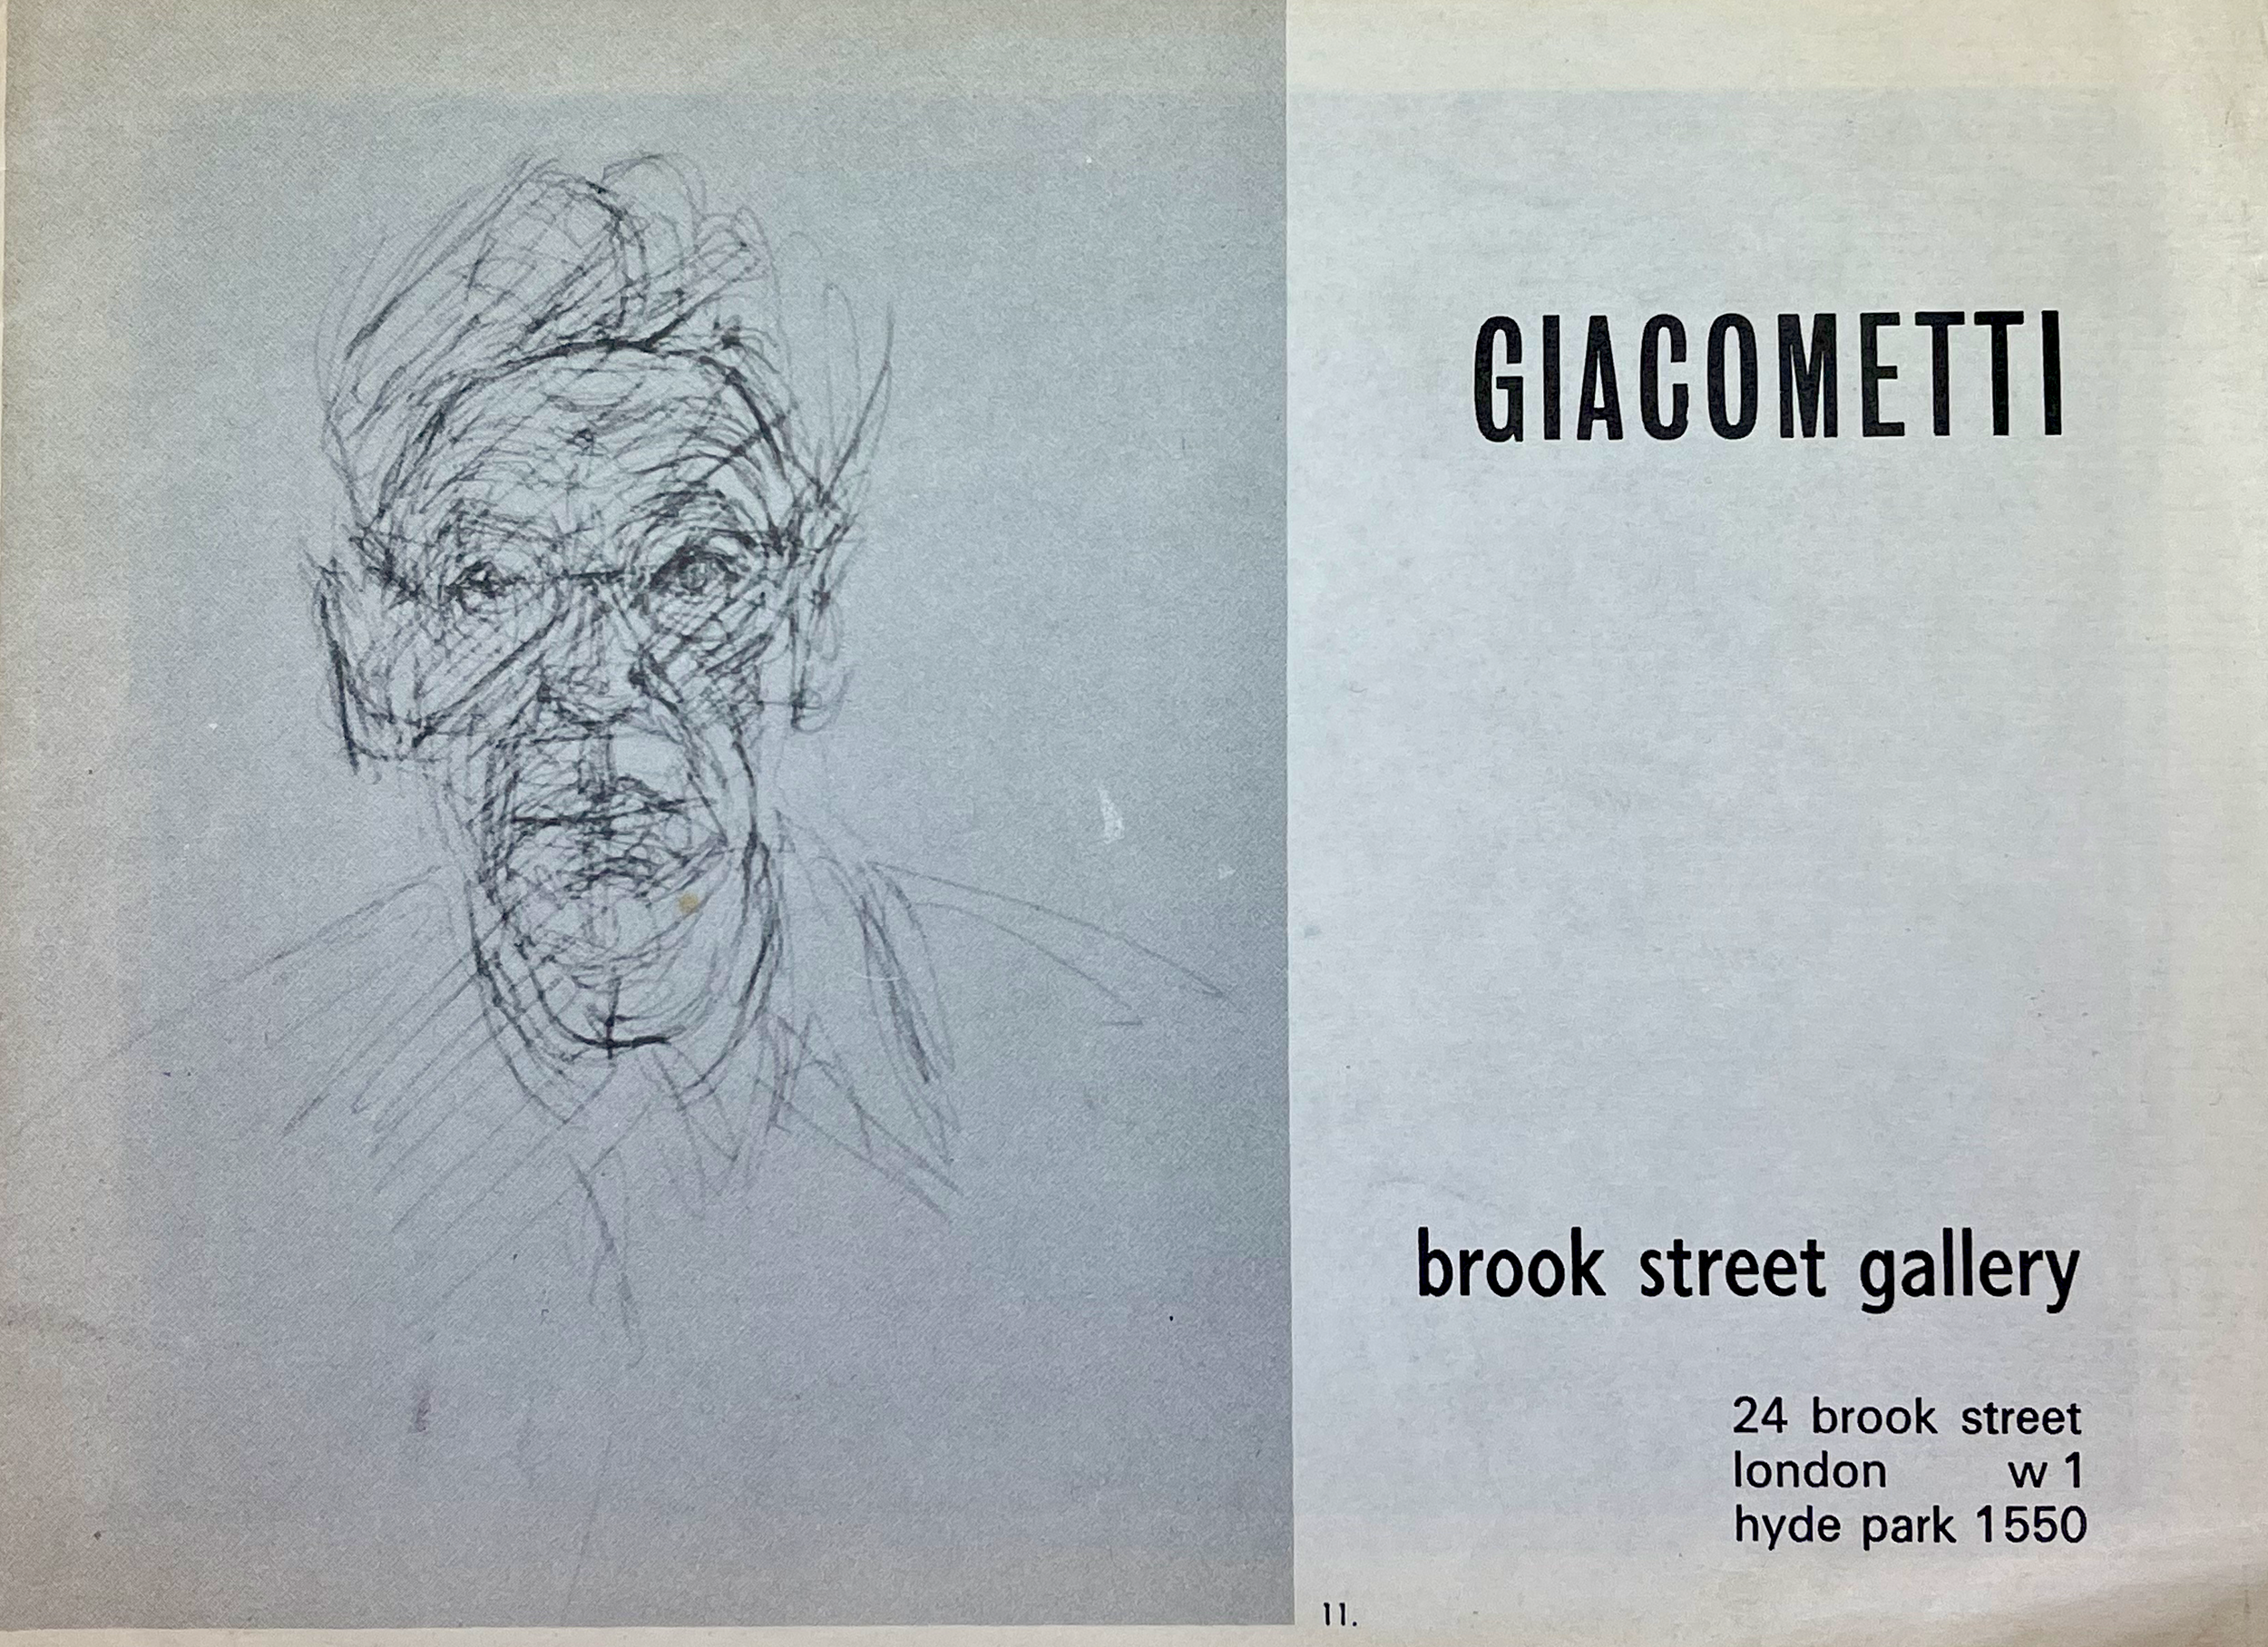 Brook Street Gallery catalogue from Giacometti’s solo exhibition